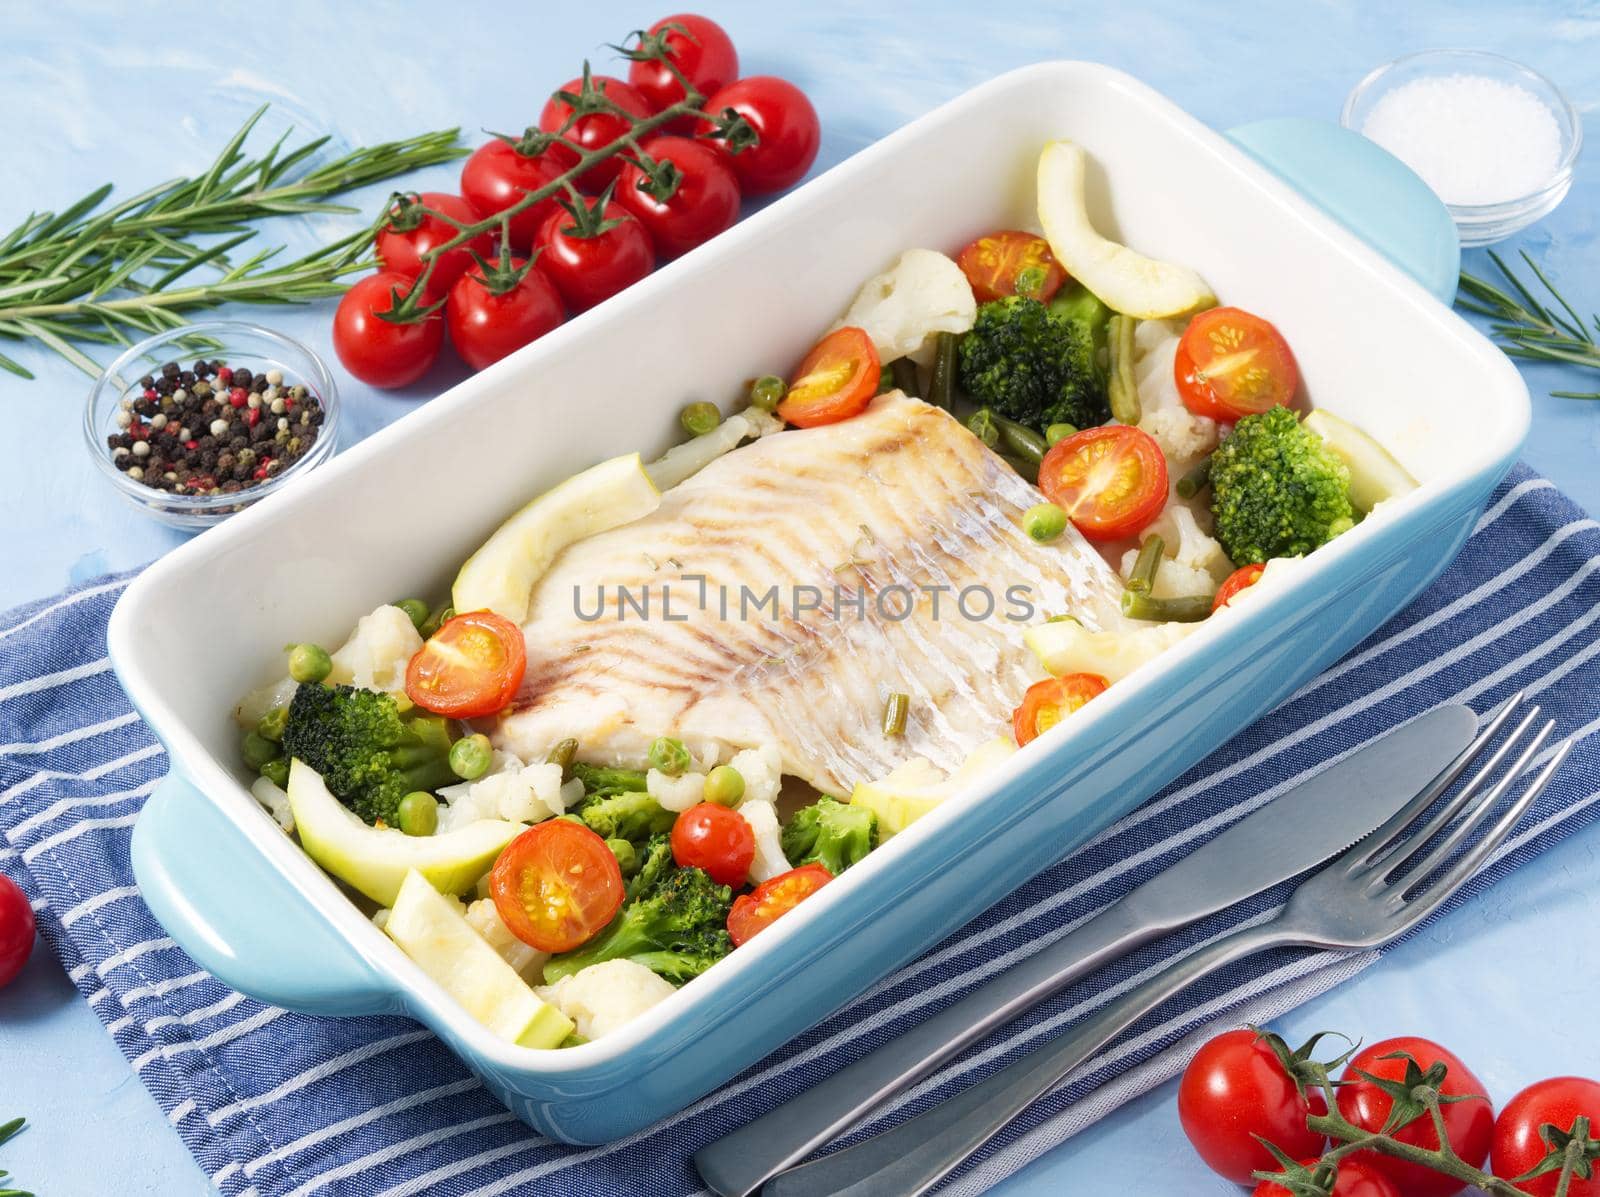 Fish cod baked in blue oven with vegetables - broccoli, tomatoes. Healthy diet food. by NataBene